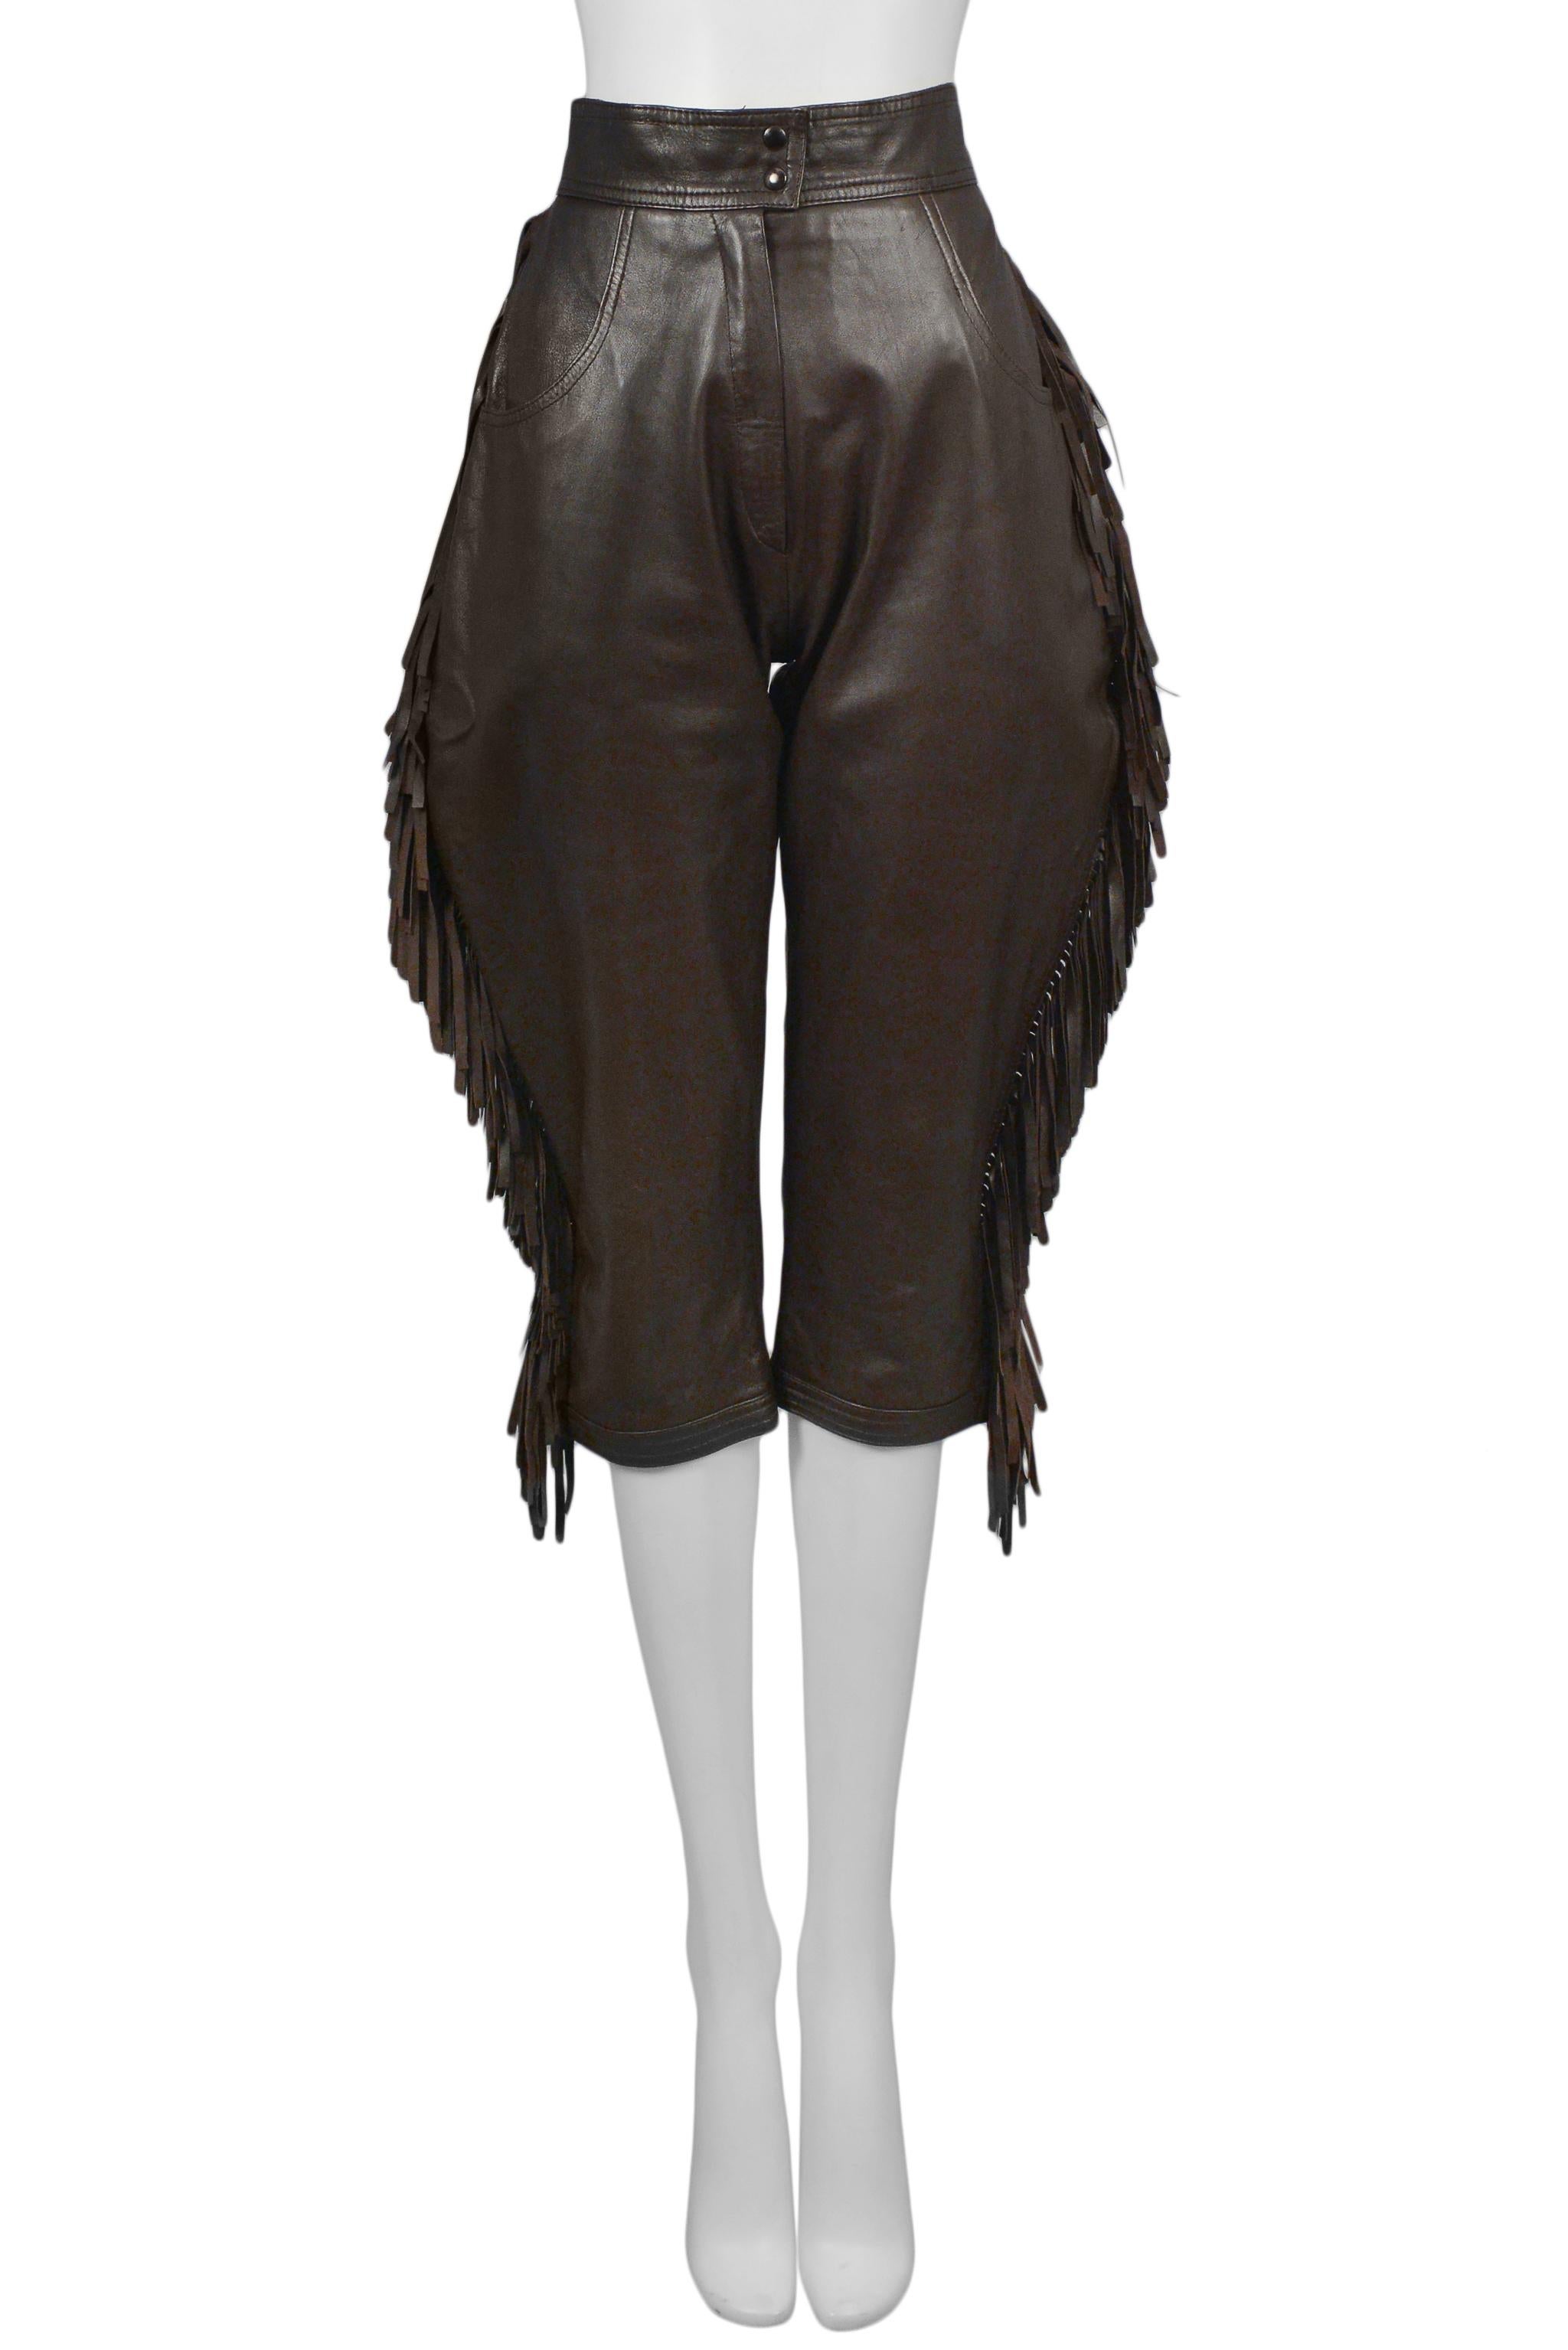 Resurrection Vintage is excited to present a pair of vintage Yves Saint Laurent brown leather knickers featuring fringe, jodhpur style, and cropped legs. 

Yves Saint Laurent
Size: Today's size 2 or 25.5